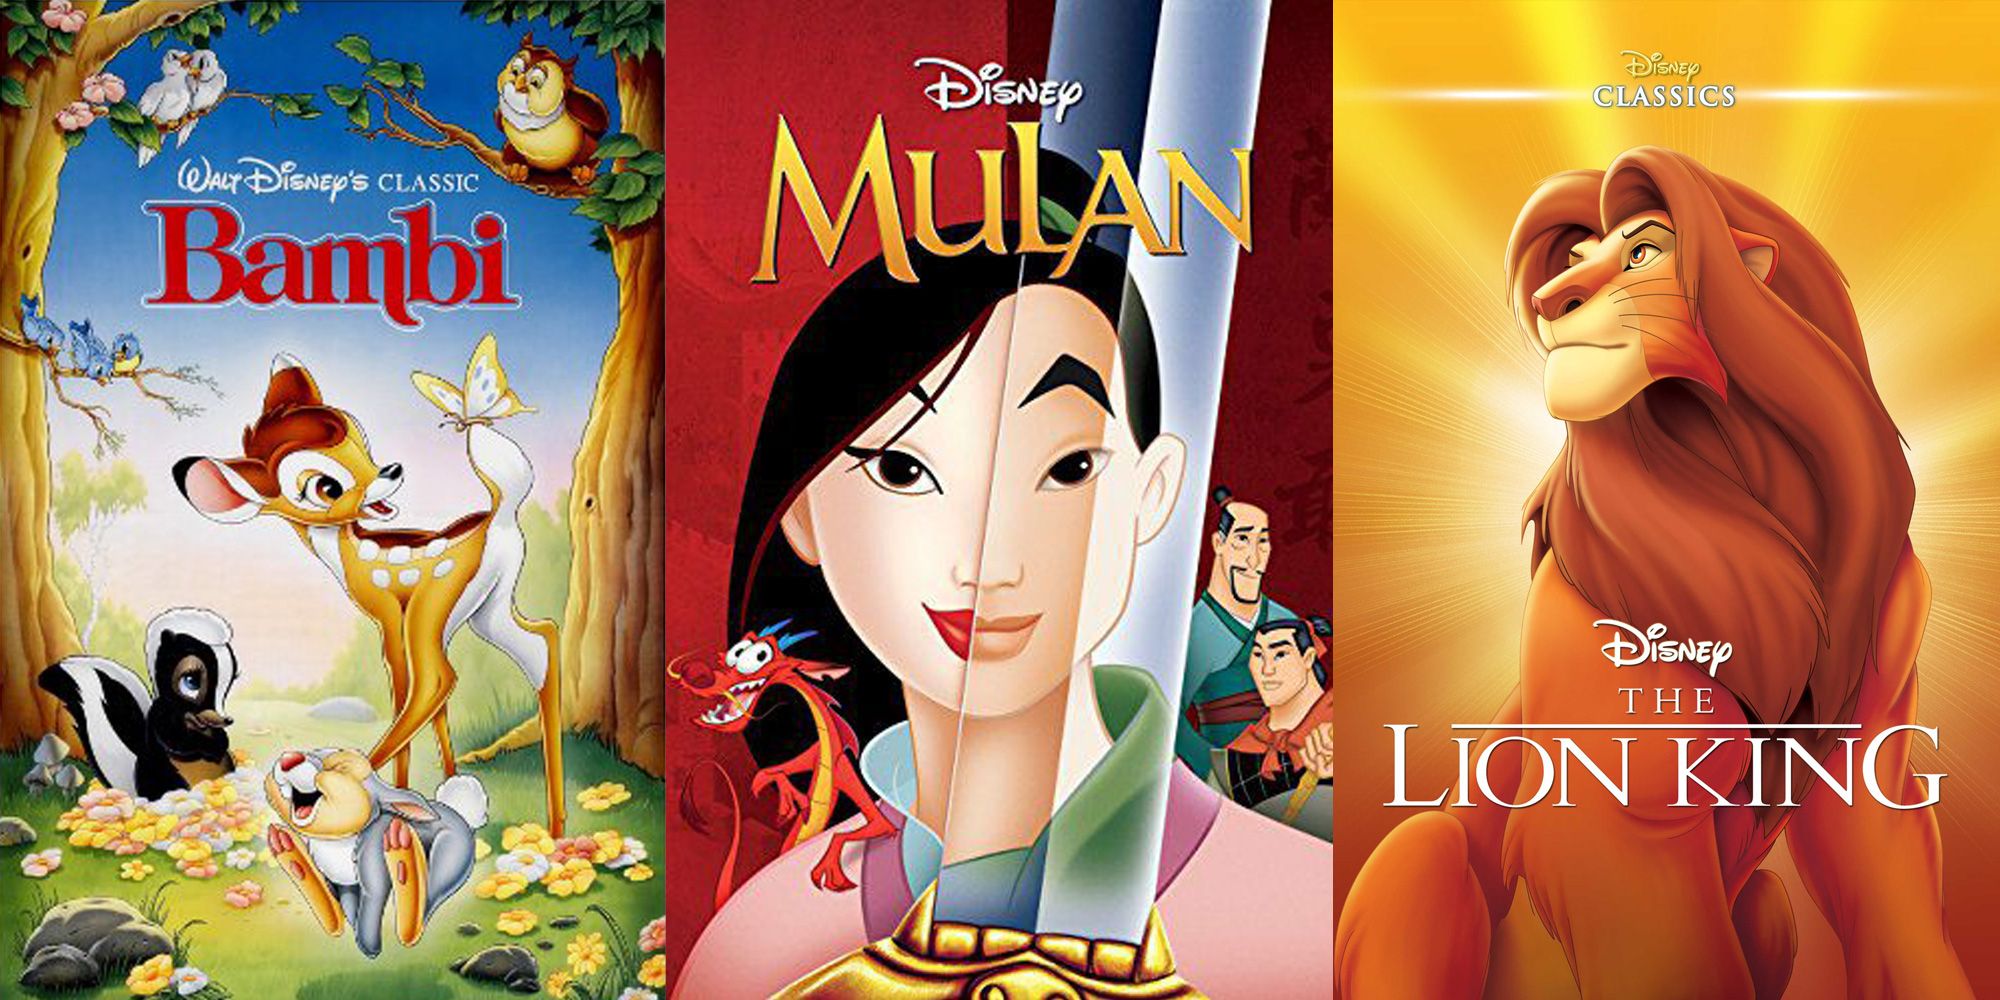 mulan poster in lilo and stitch